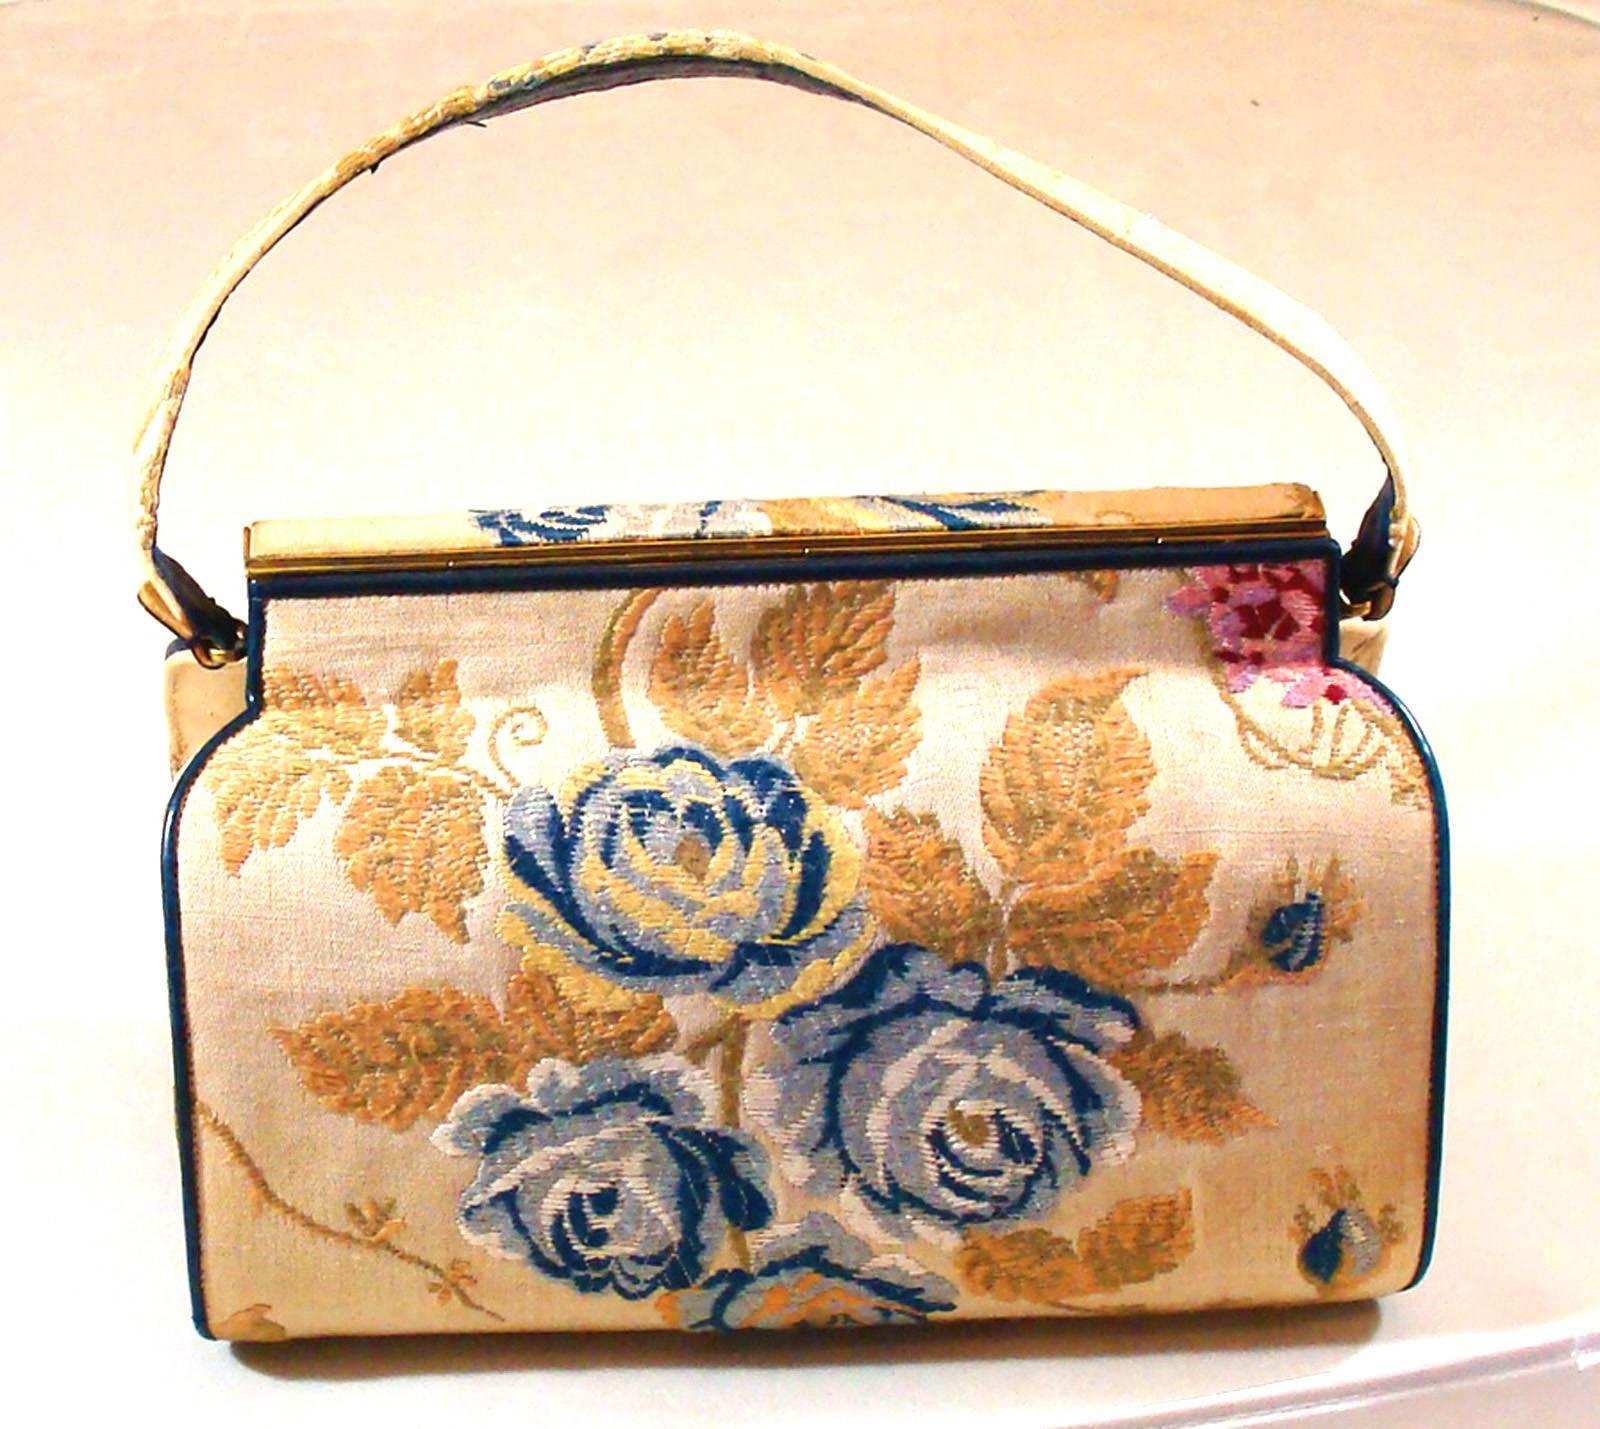 Rare Structured Purse in Floral, Embroidered Fabric by Nettie Rosenstein 2